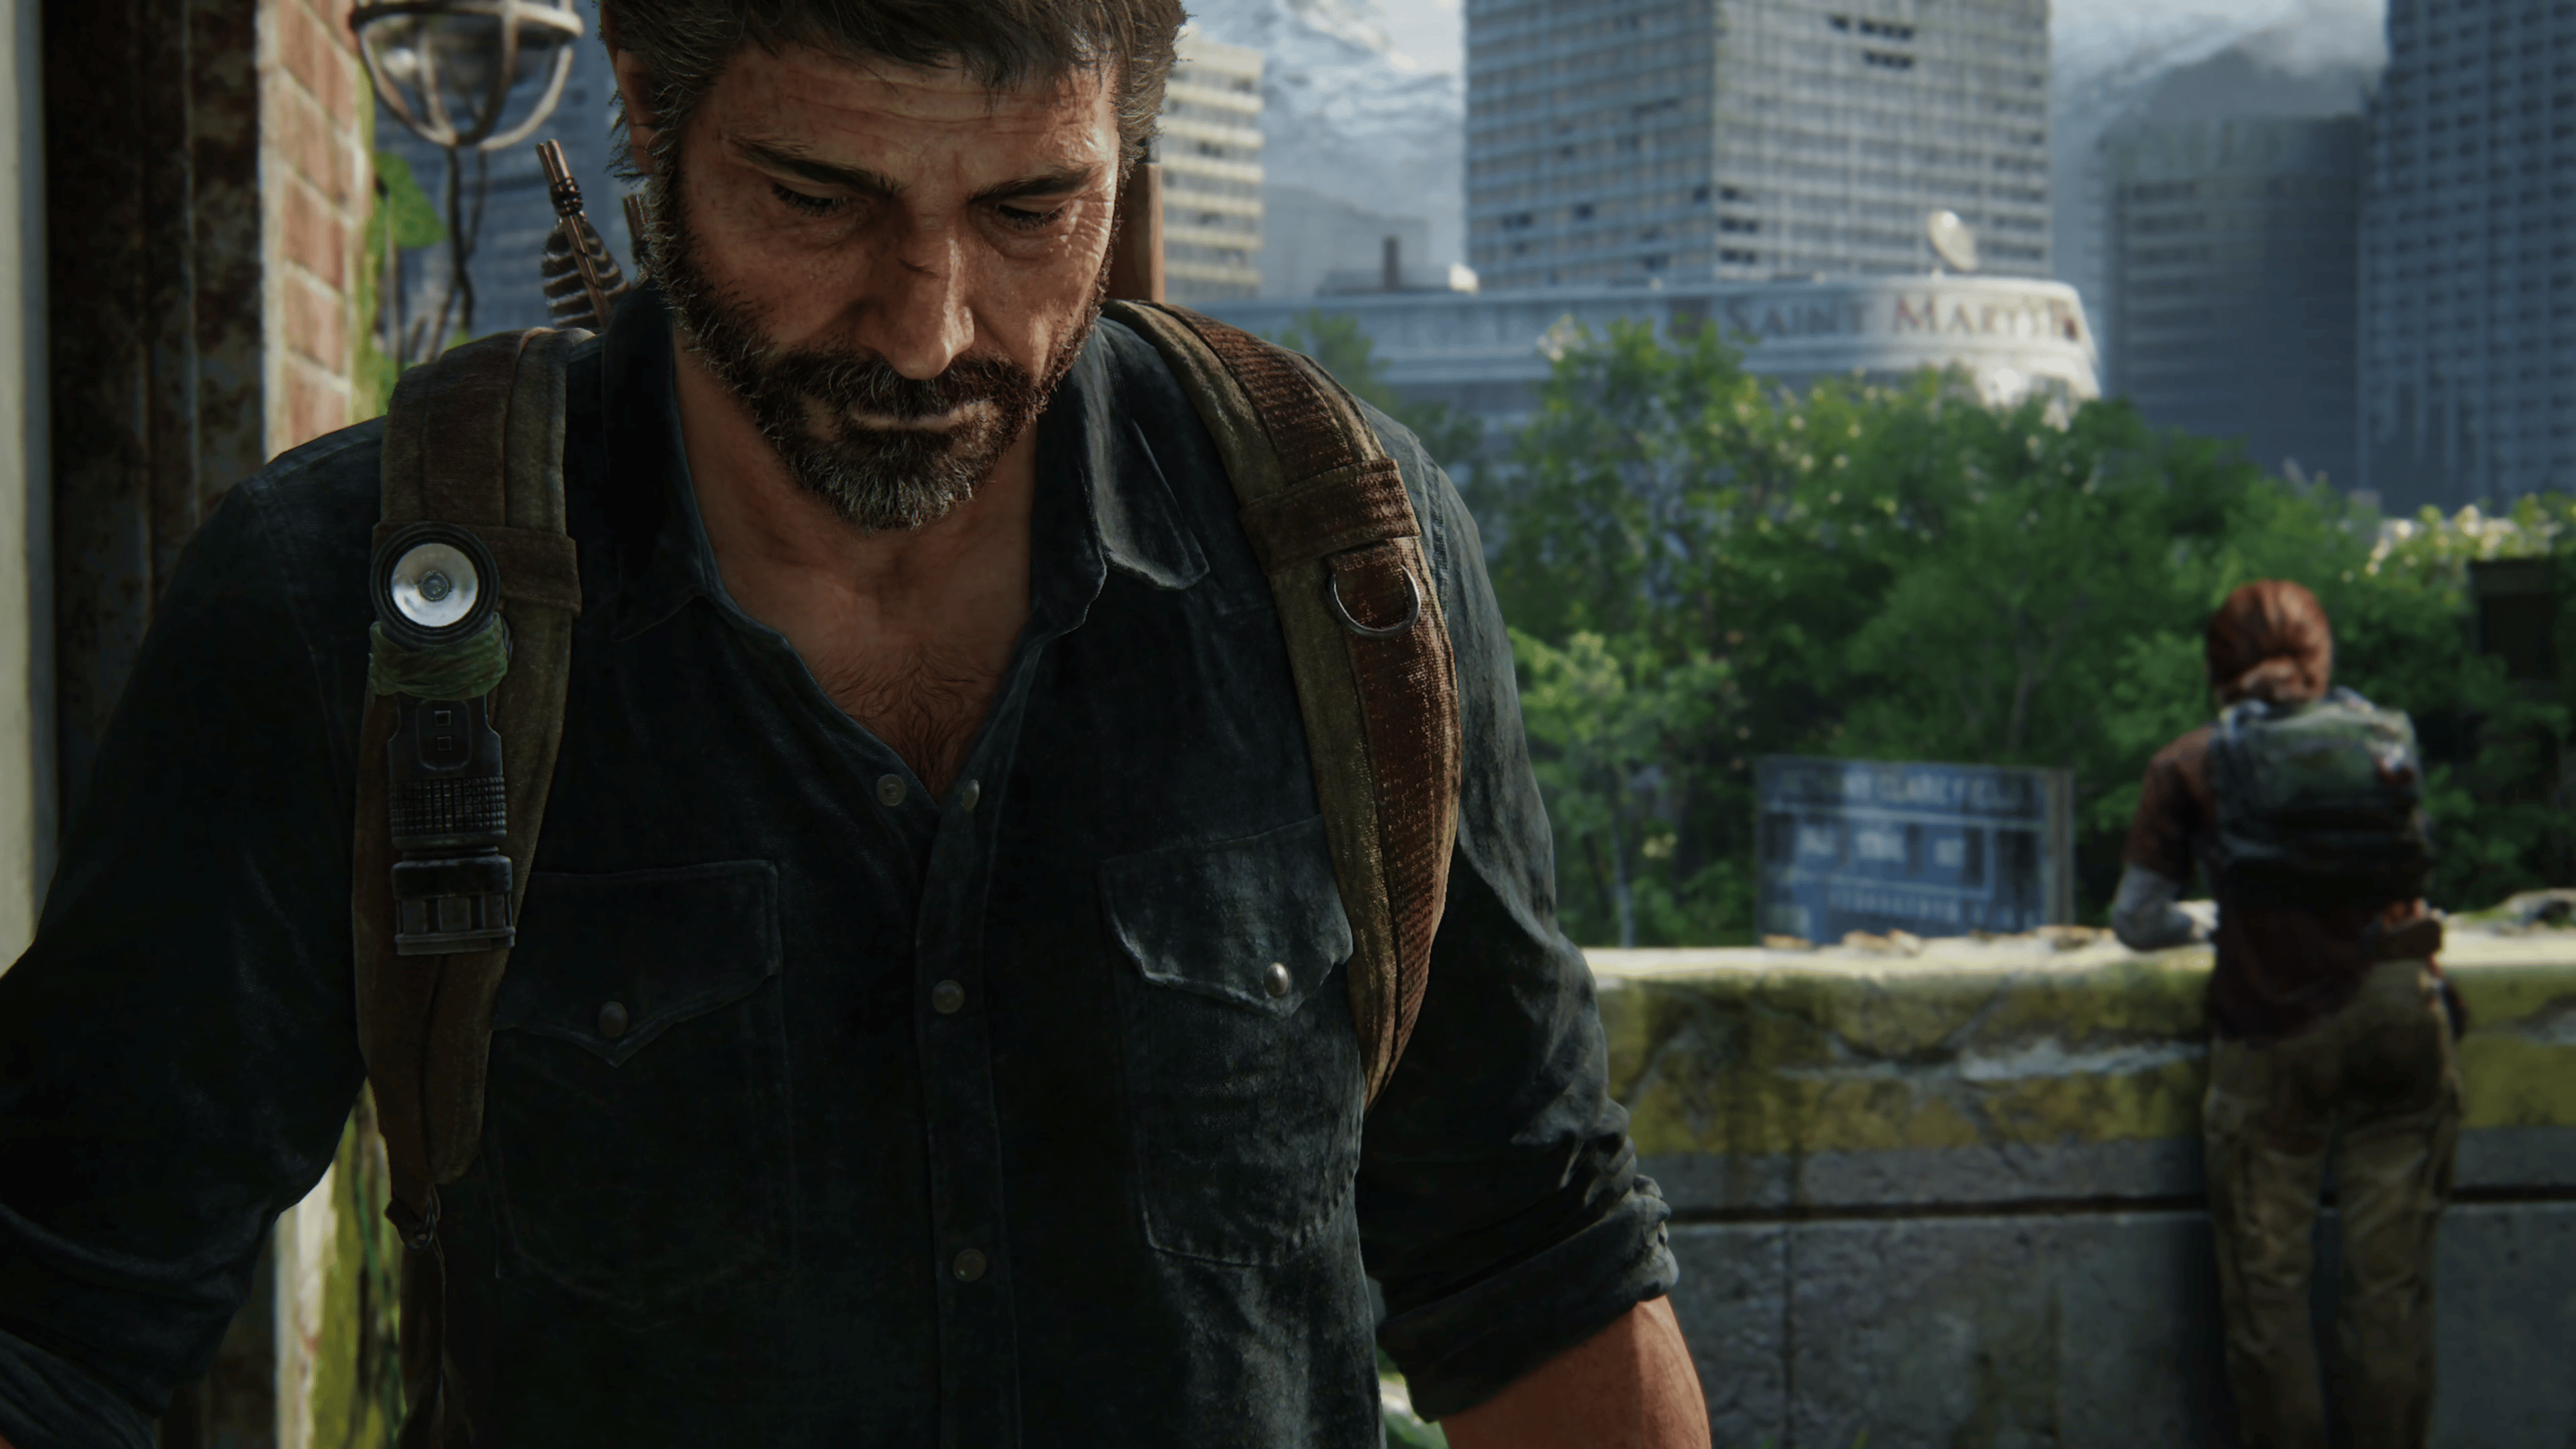 Naughty Dog really wants you to understand The Last of Us Part 1